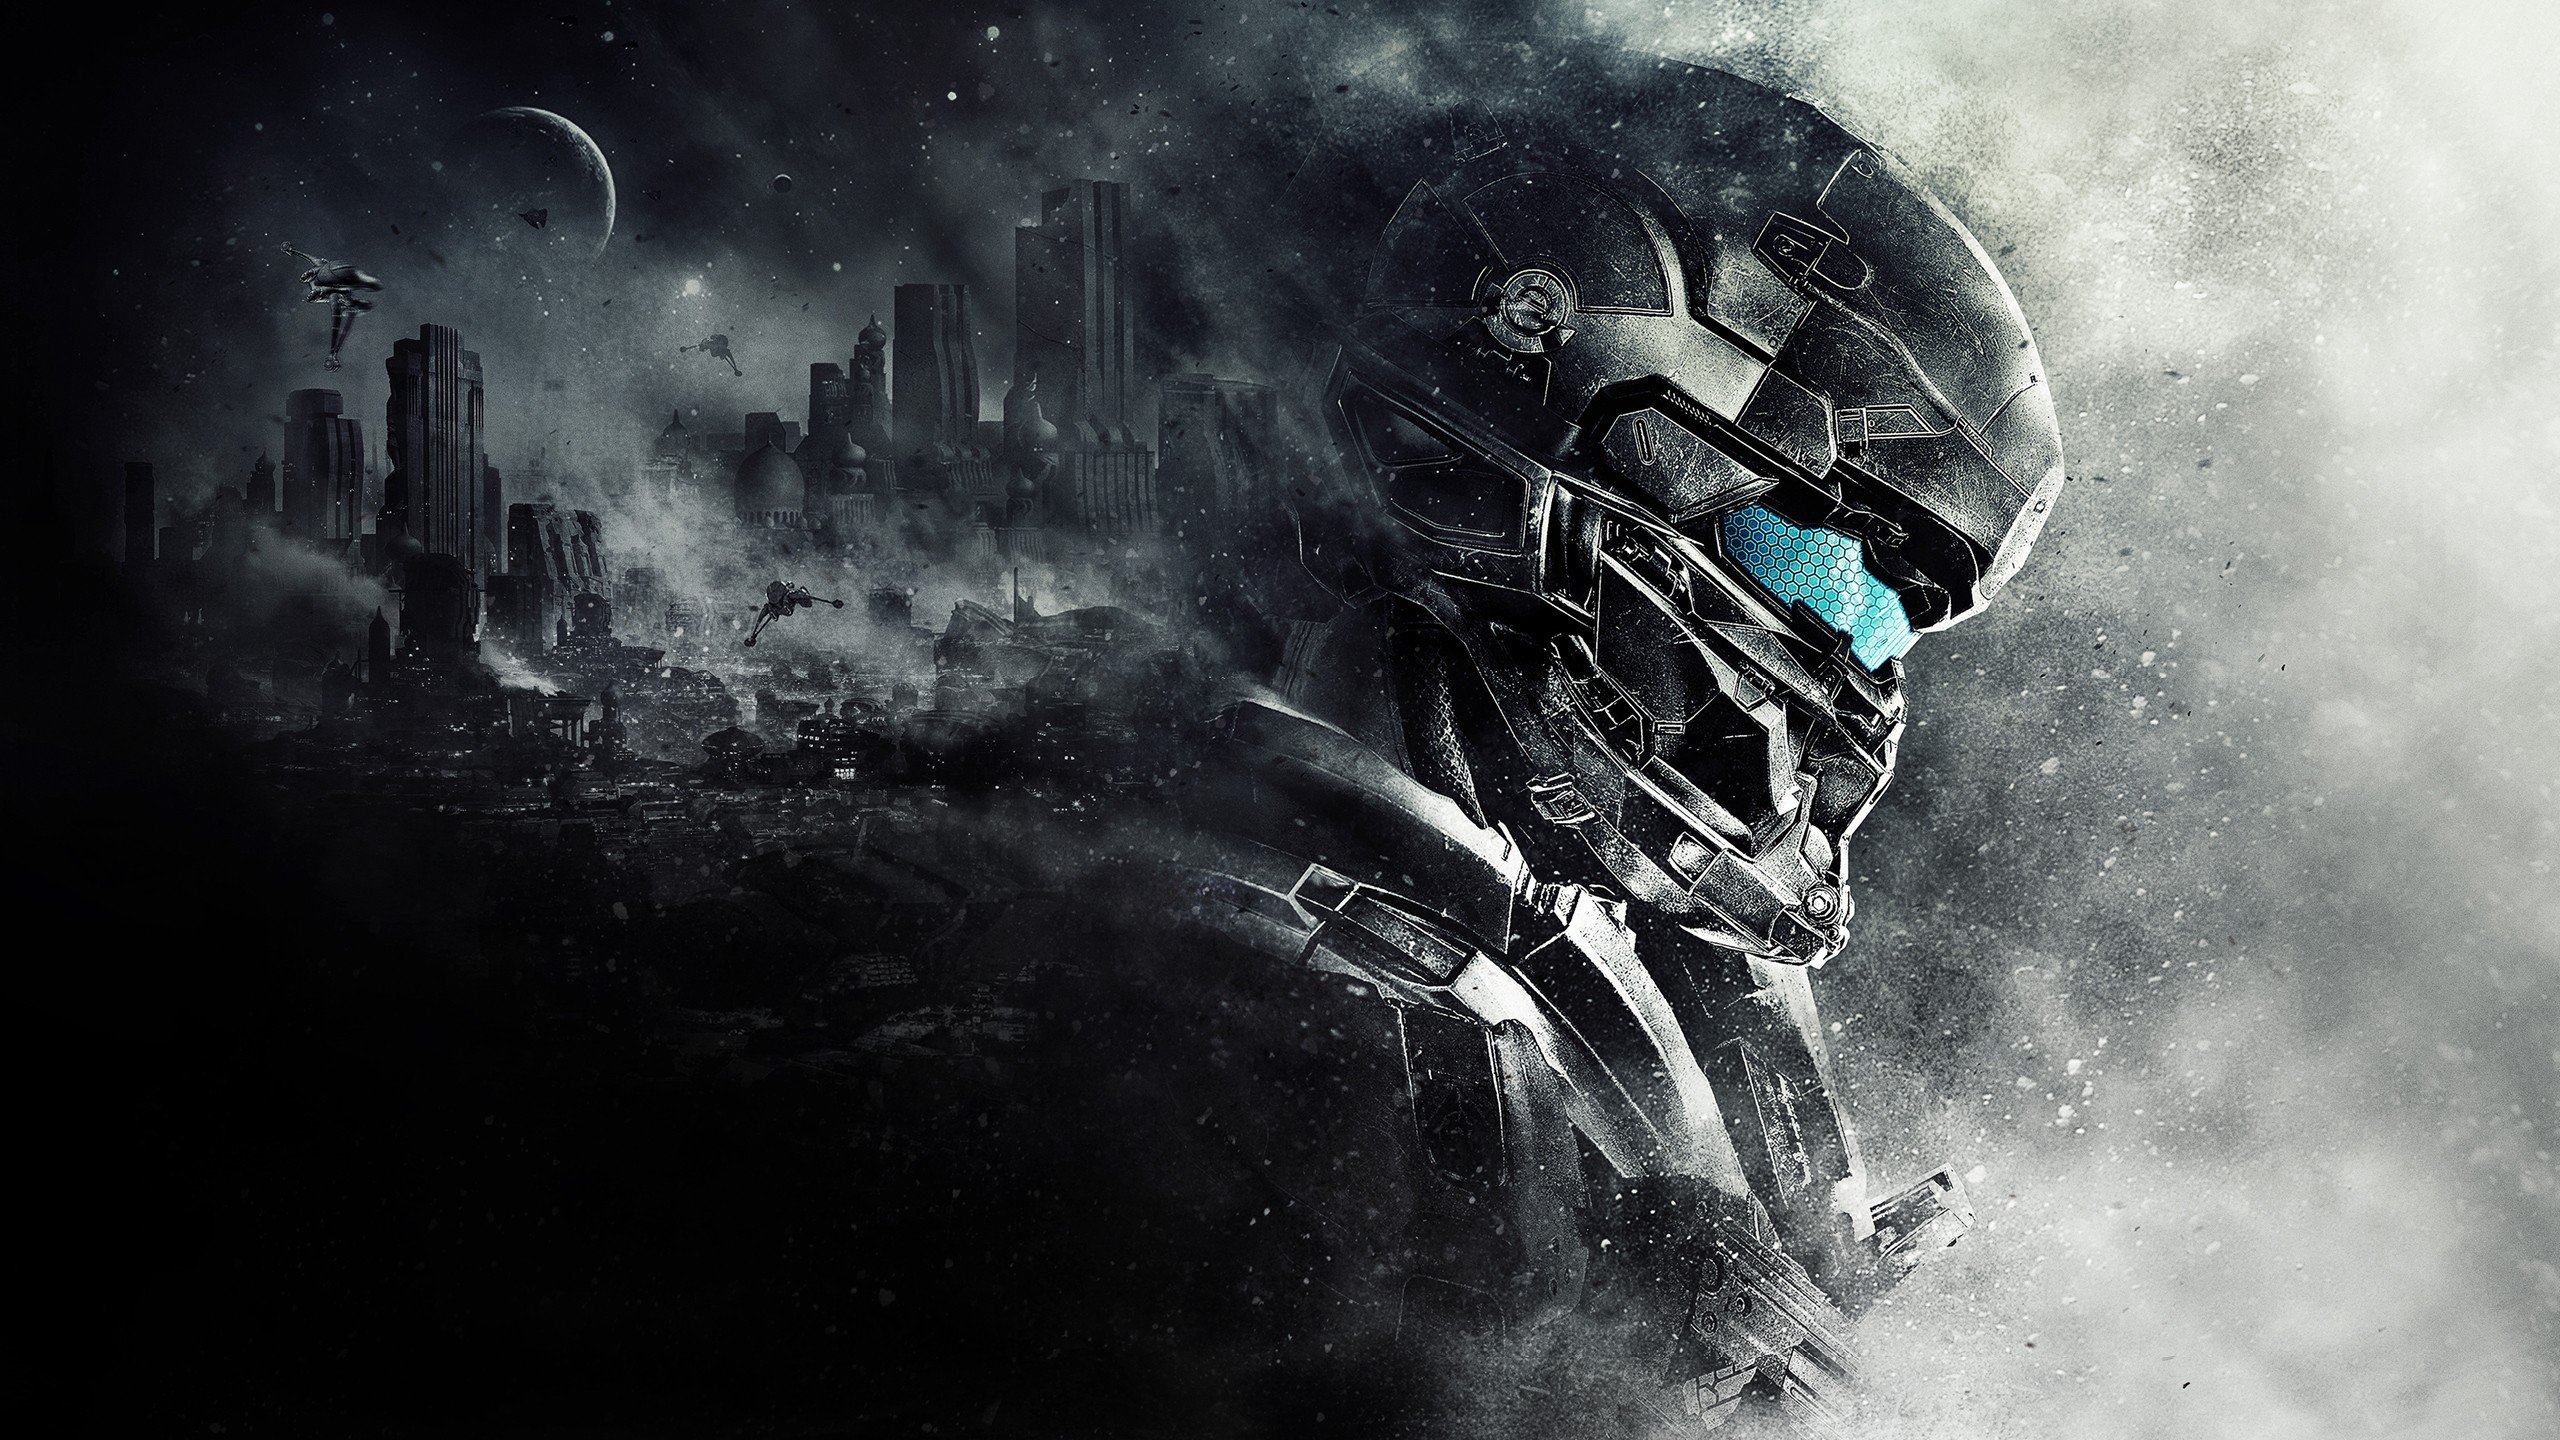 halo, Shooter, Fps, Action, Sci fi, Warrior, Futuristic, Tactical, Stealth, Armor Wallpaper